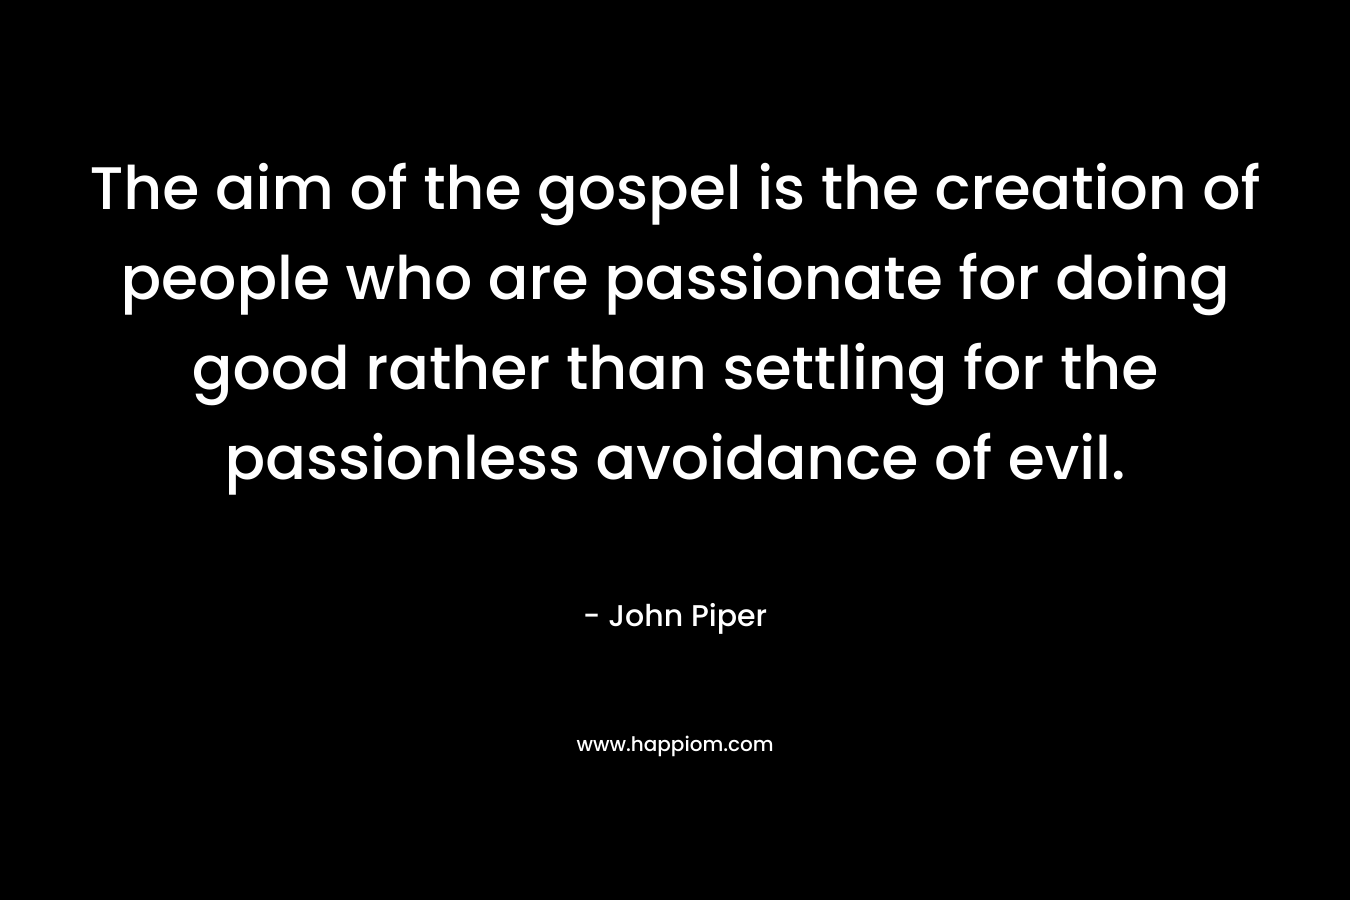 The aim of the gospel is the creation of people who are passionate for doing good rather than settling for the passionless avoidance of evil. – John Piper